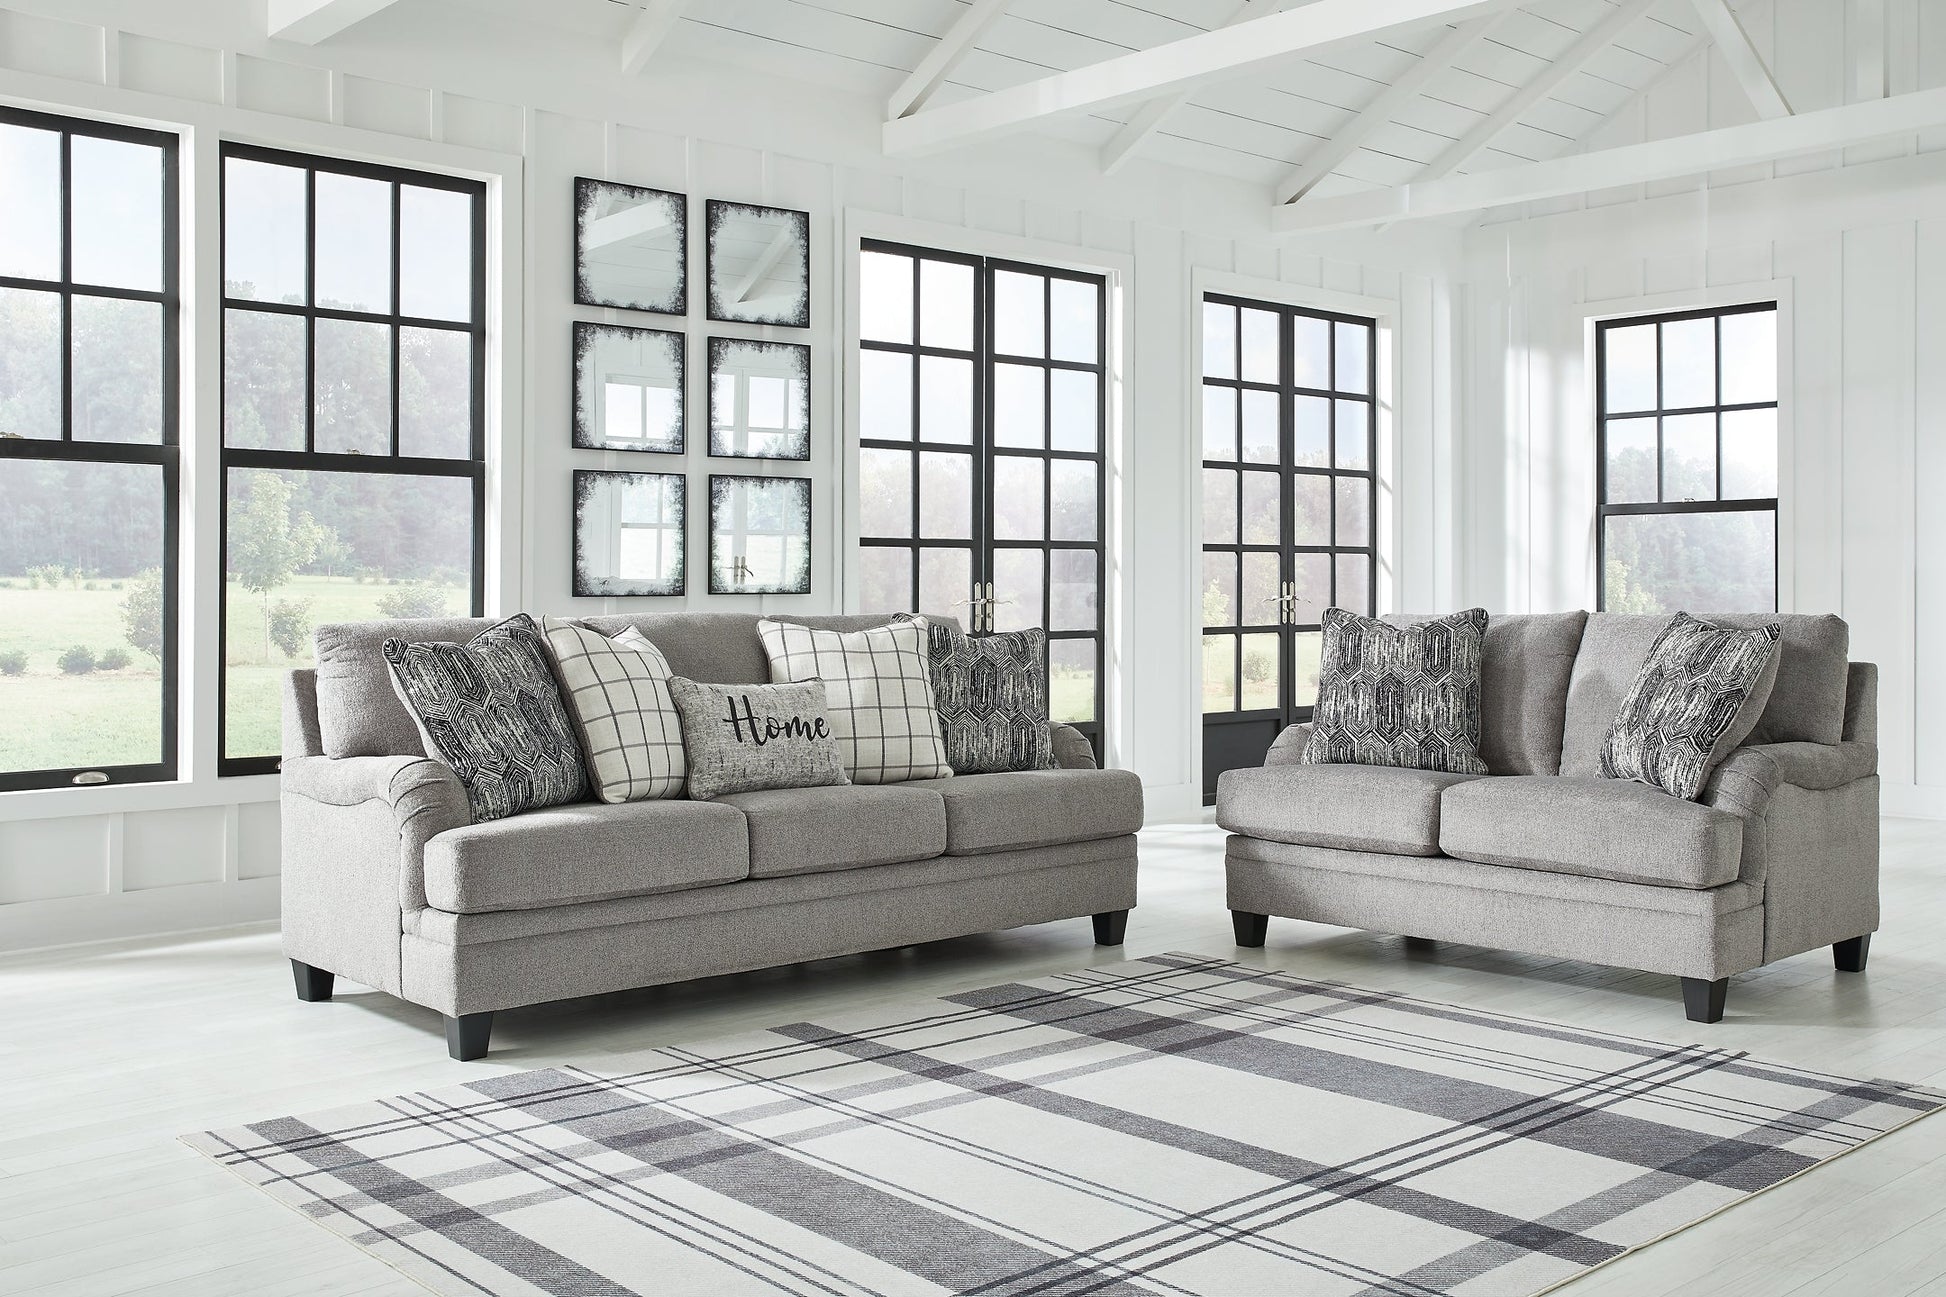 Davinca Sofa and Loveseat at Walker Mattress and Furniture Locations in Cedar Park and Belton TX.